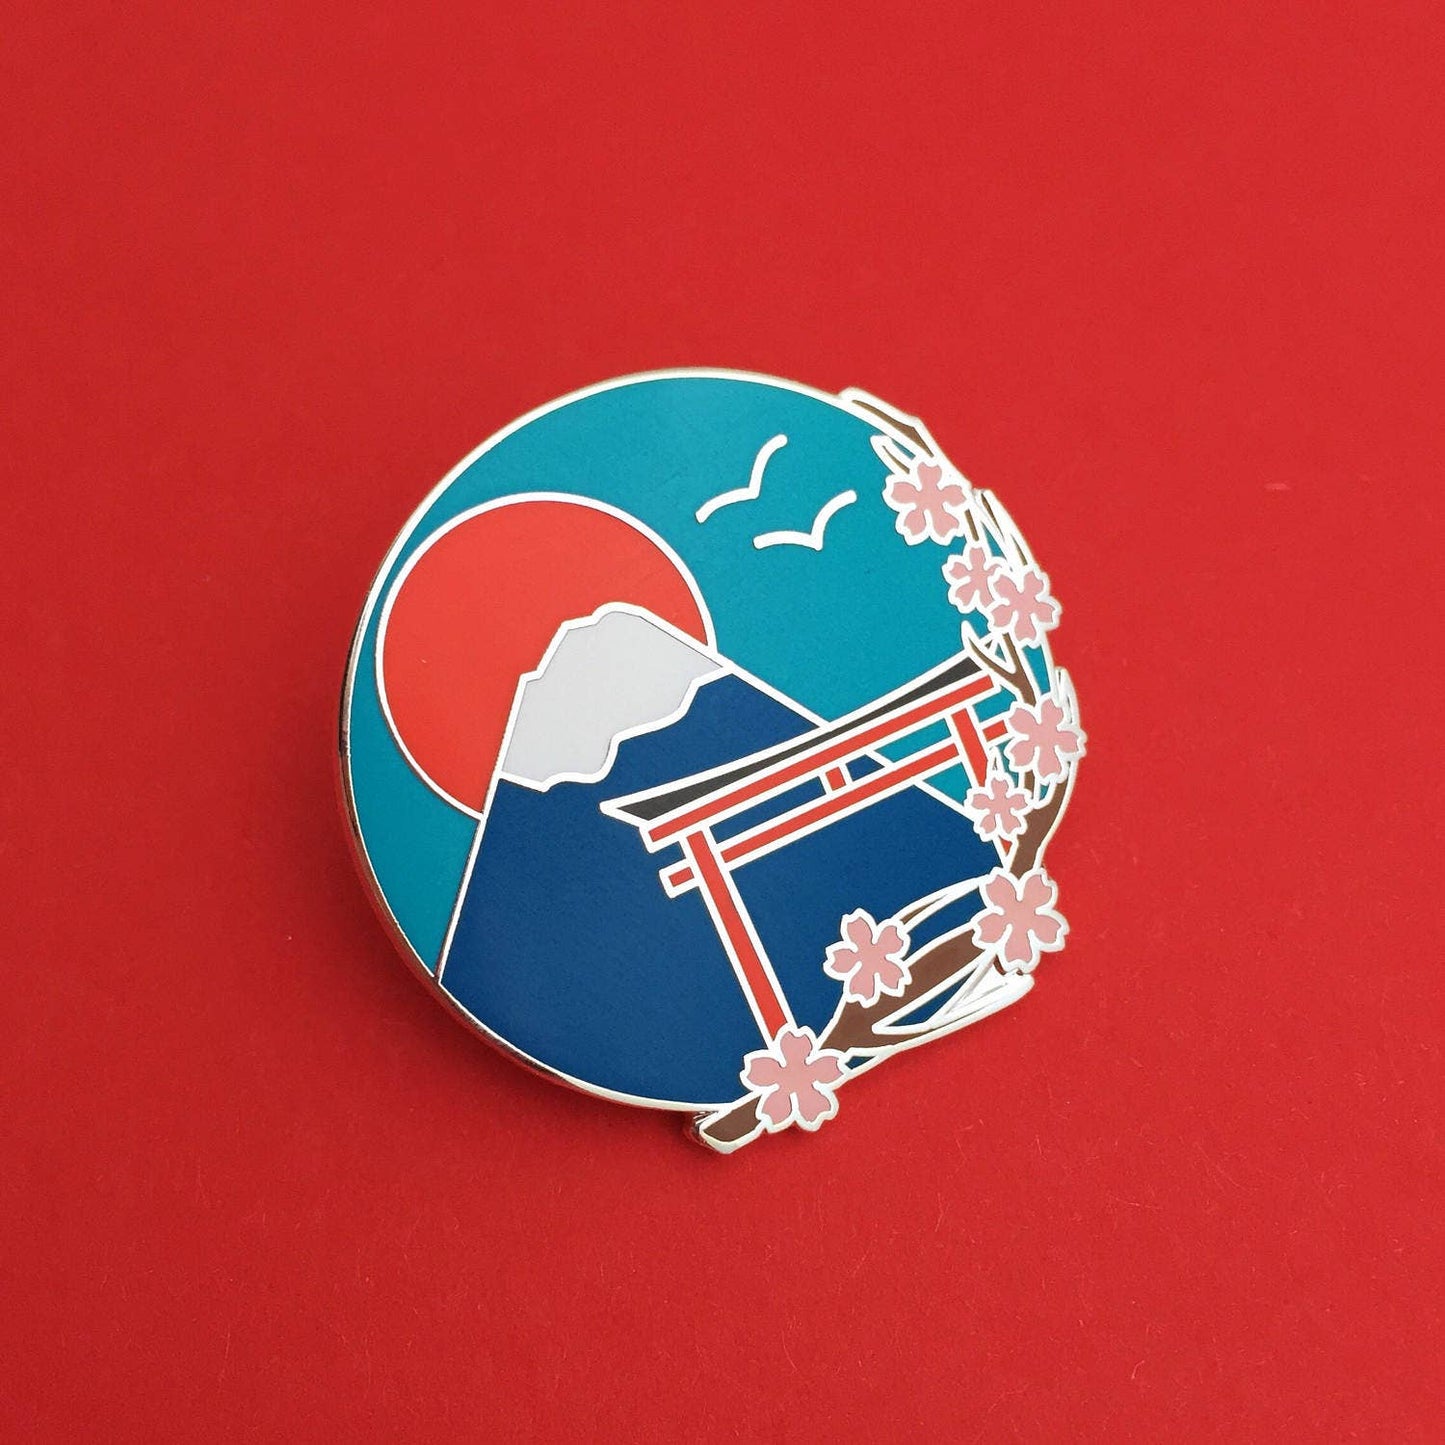 Hand Over Your Fairy Cakes - Japan Mount Fuji Cherry Blossom - Enamel Pin